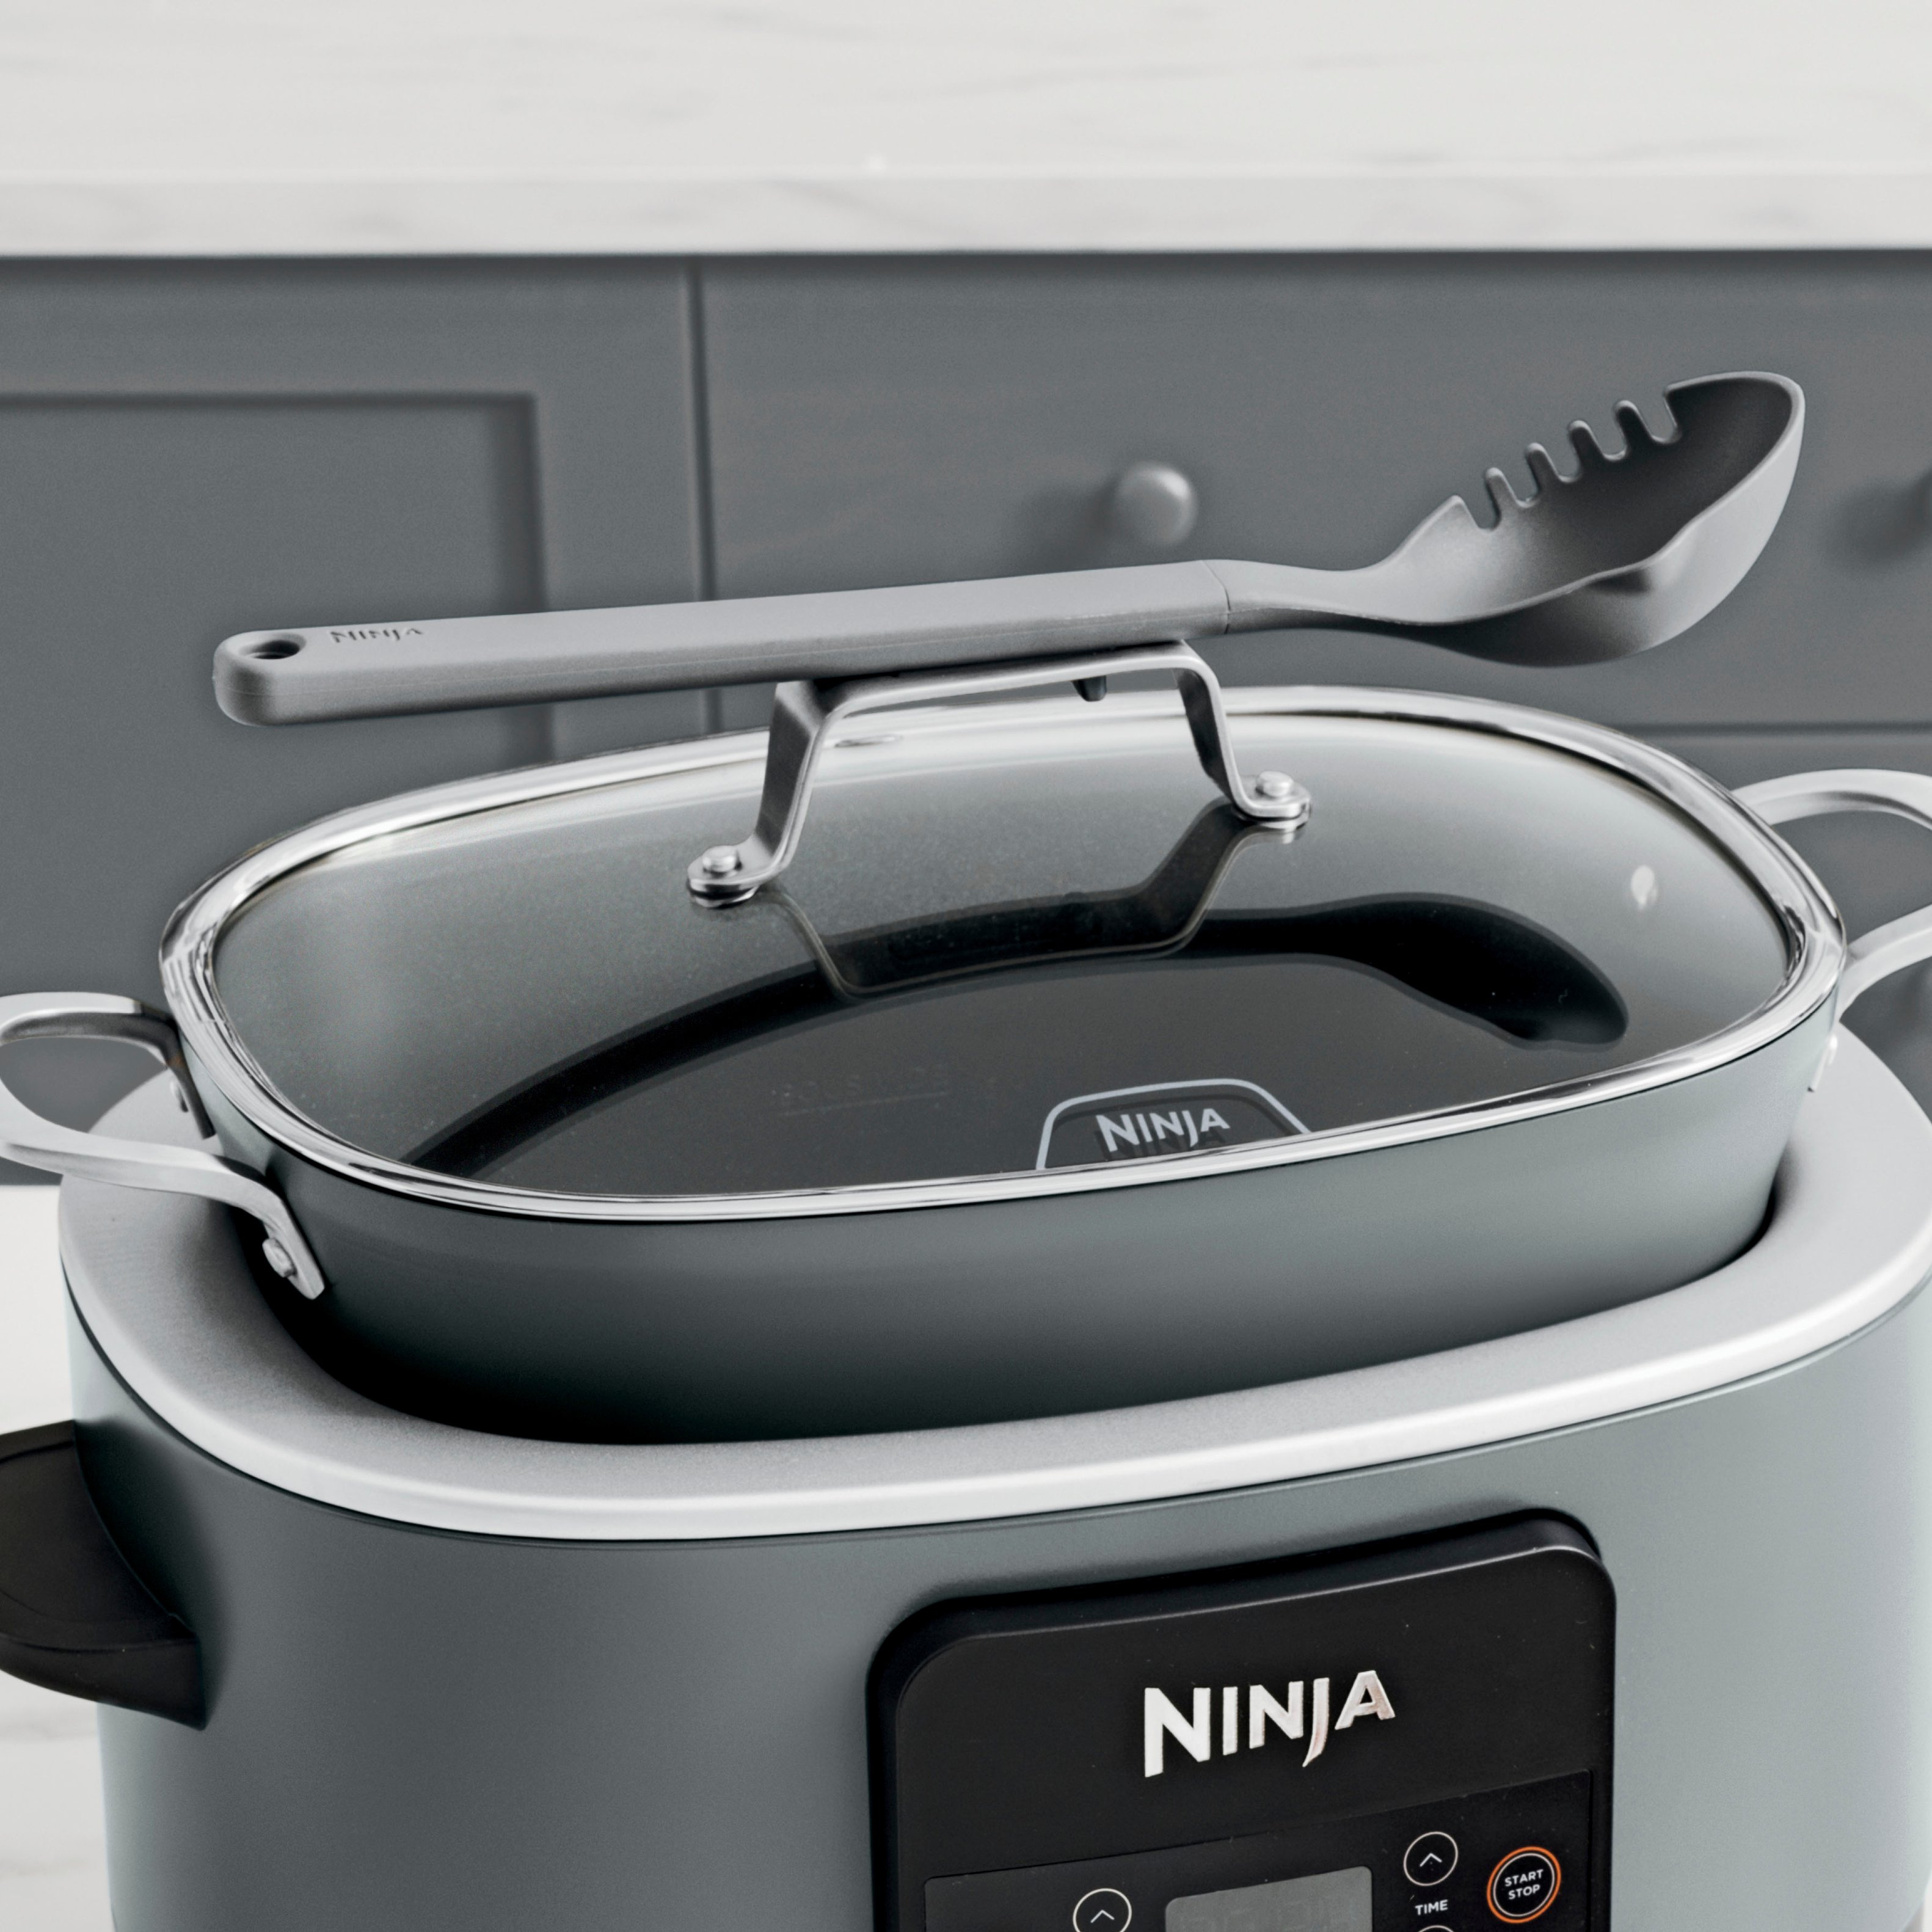 Ninja MC1010 Foodi PossibleCooker PLUS - Sous Vide & Proof 6-in-1  Multi-Cooker, with 8.5 Quarts, Slow Cooker, Dutch Oven & More, Glass Lid 